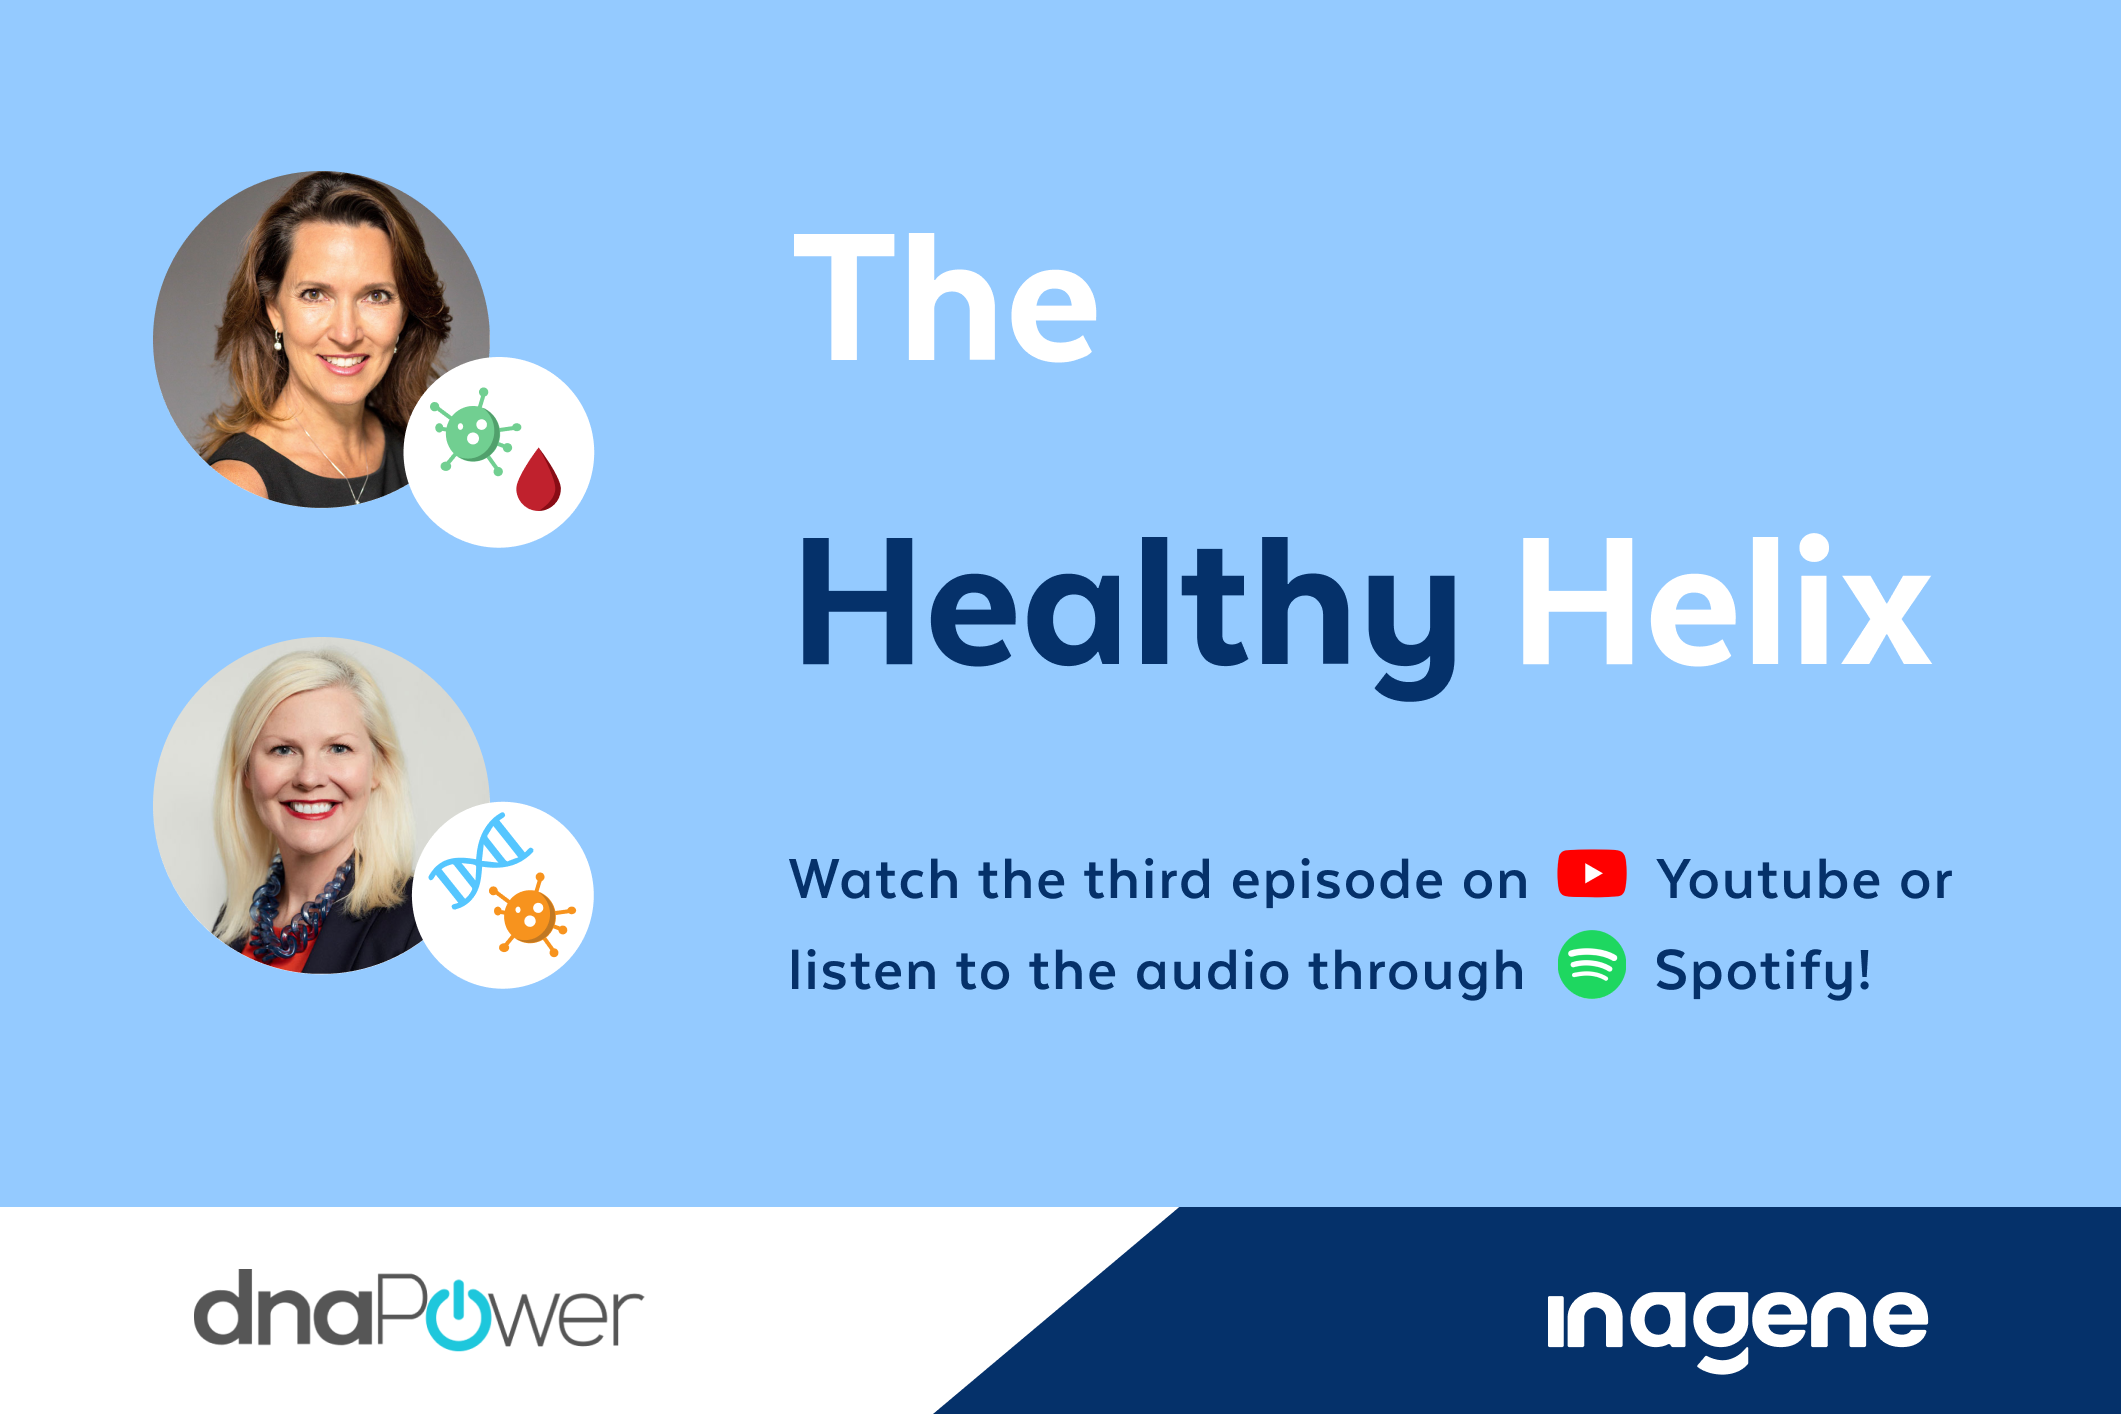 Inagene Diagnostics Launches the Third Episode of the HealthyHelix